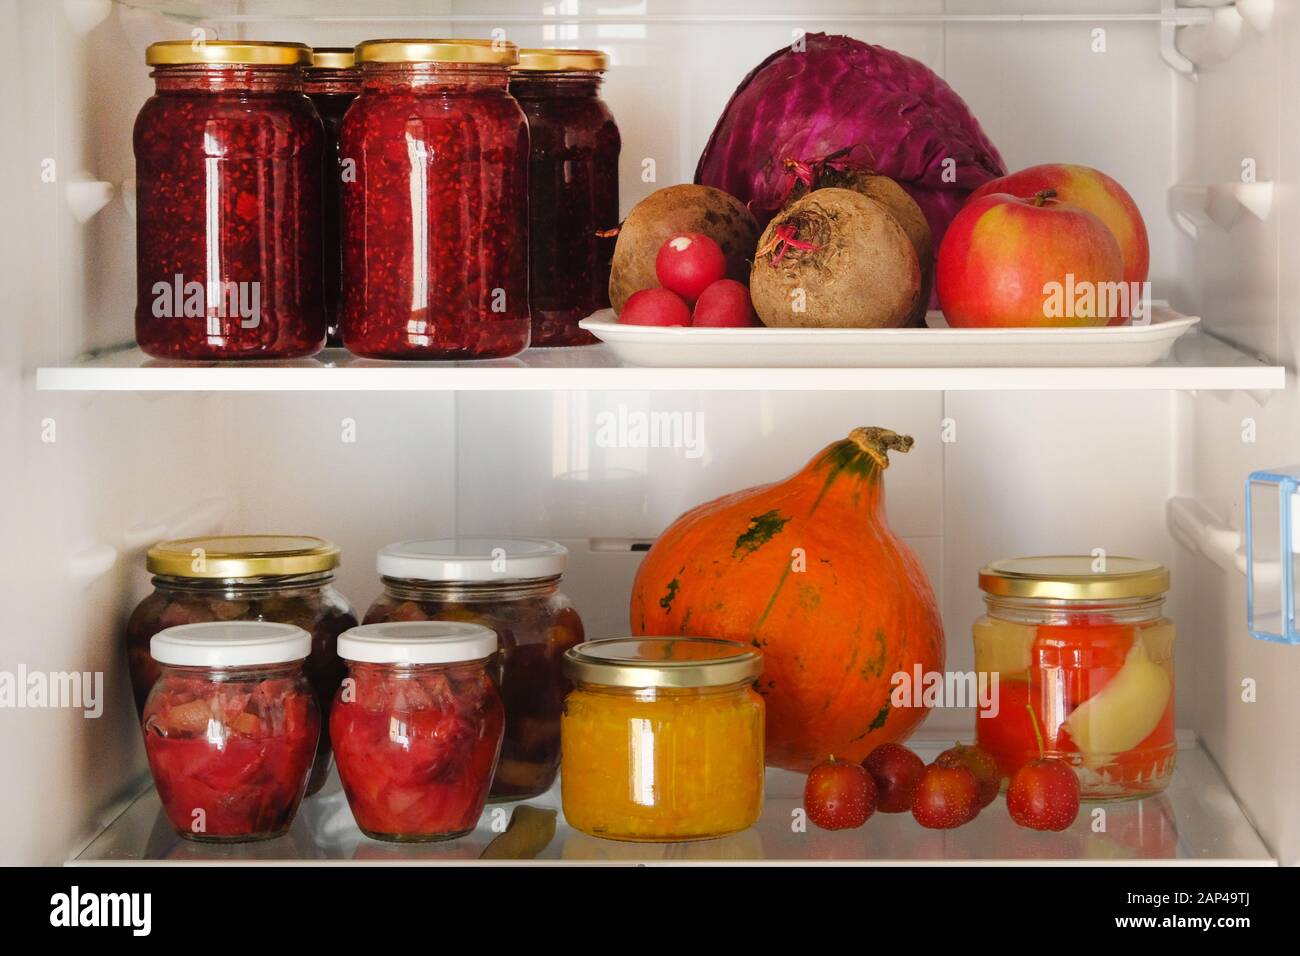 Jars with homemade fruit and berry jams and fresh red, purple and orange vegetables and fruits on shelf in fridge. Fermented healthy vegetarian foods Stock Photo